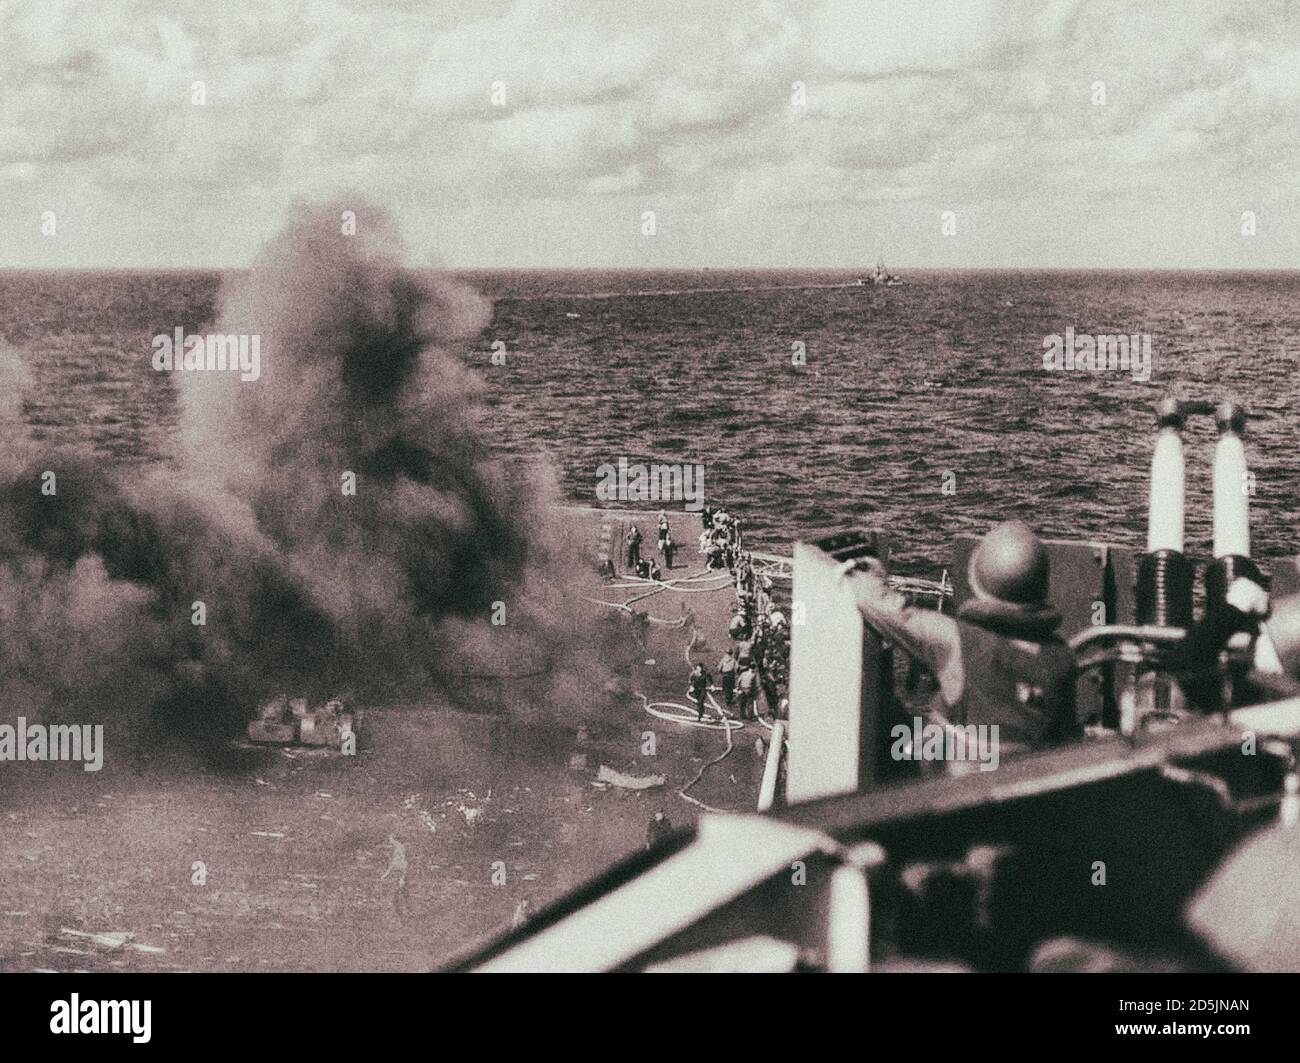 The US Ticonderoga aircraft carrier (CV-14) after the Japanese kamikaze attack, the Kamikaze aircraft crashed into the flight deck, and its bomb explo Stock Photo